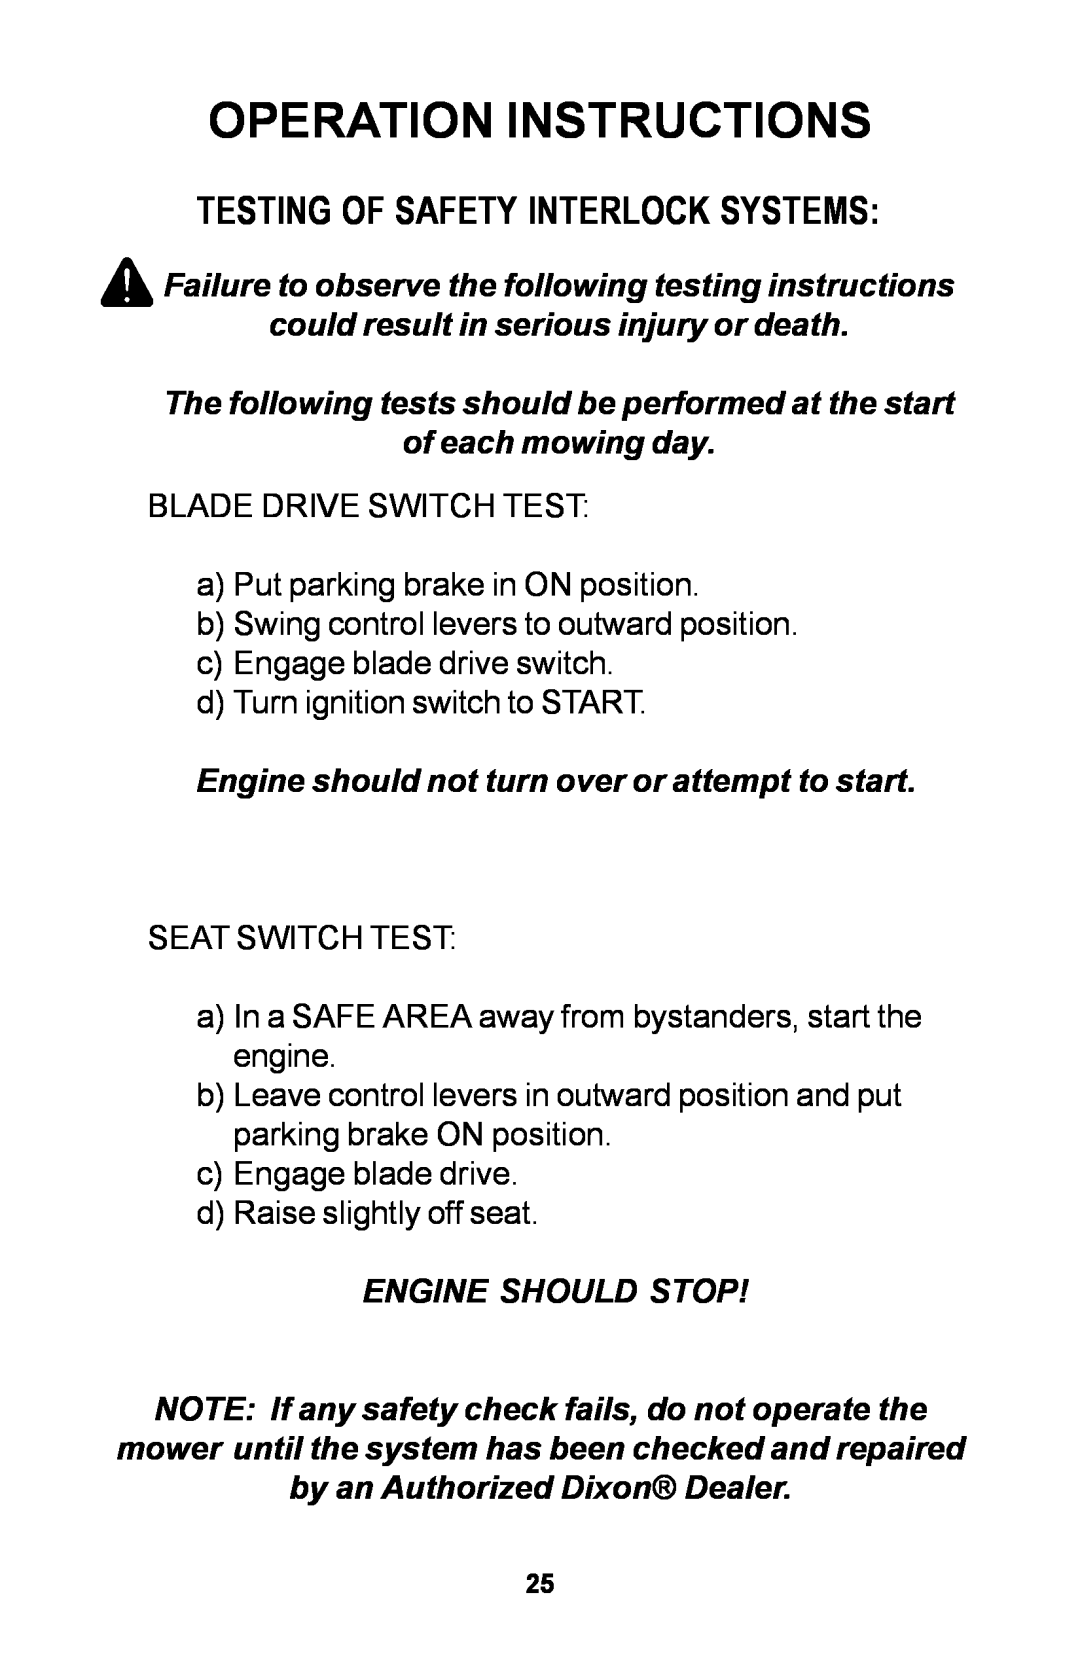 Dixon ZTR manual Operation Instructions, Testing Of Safety Interlock Systems 